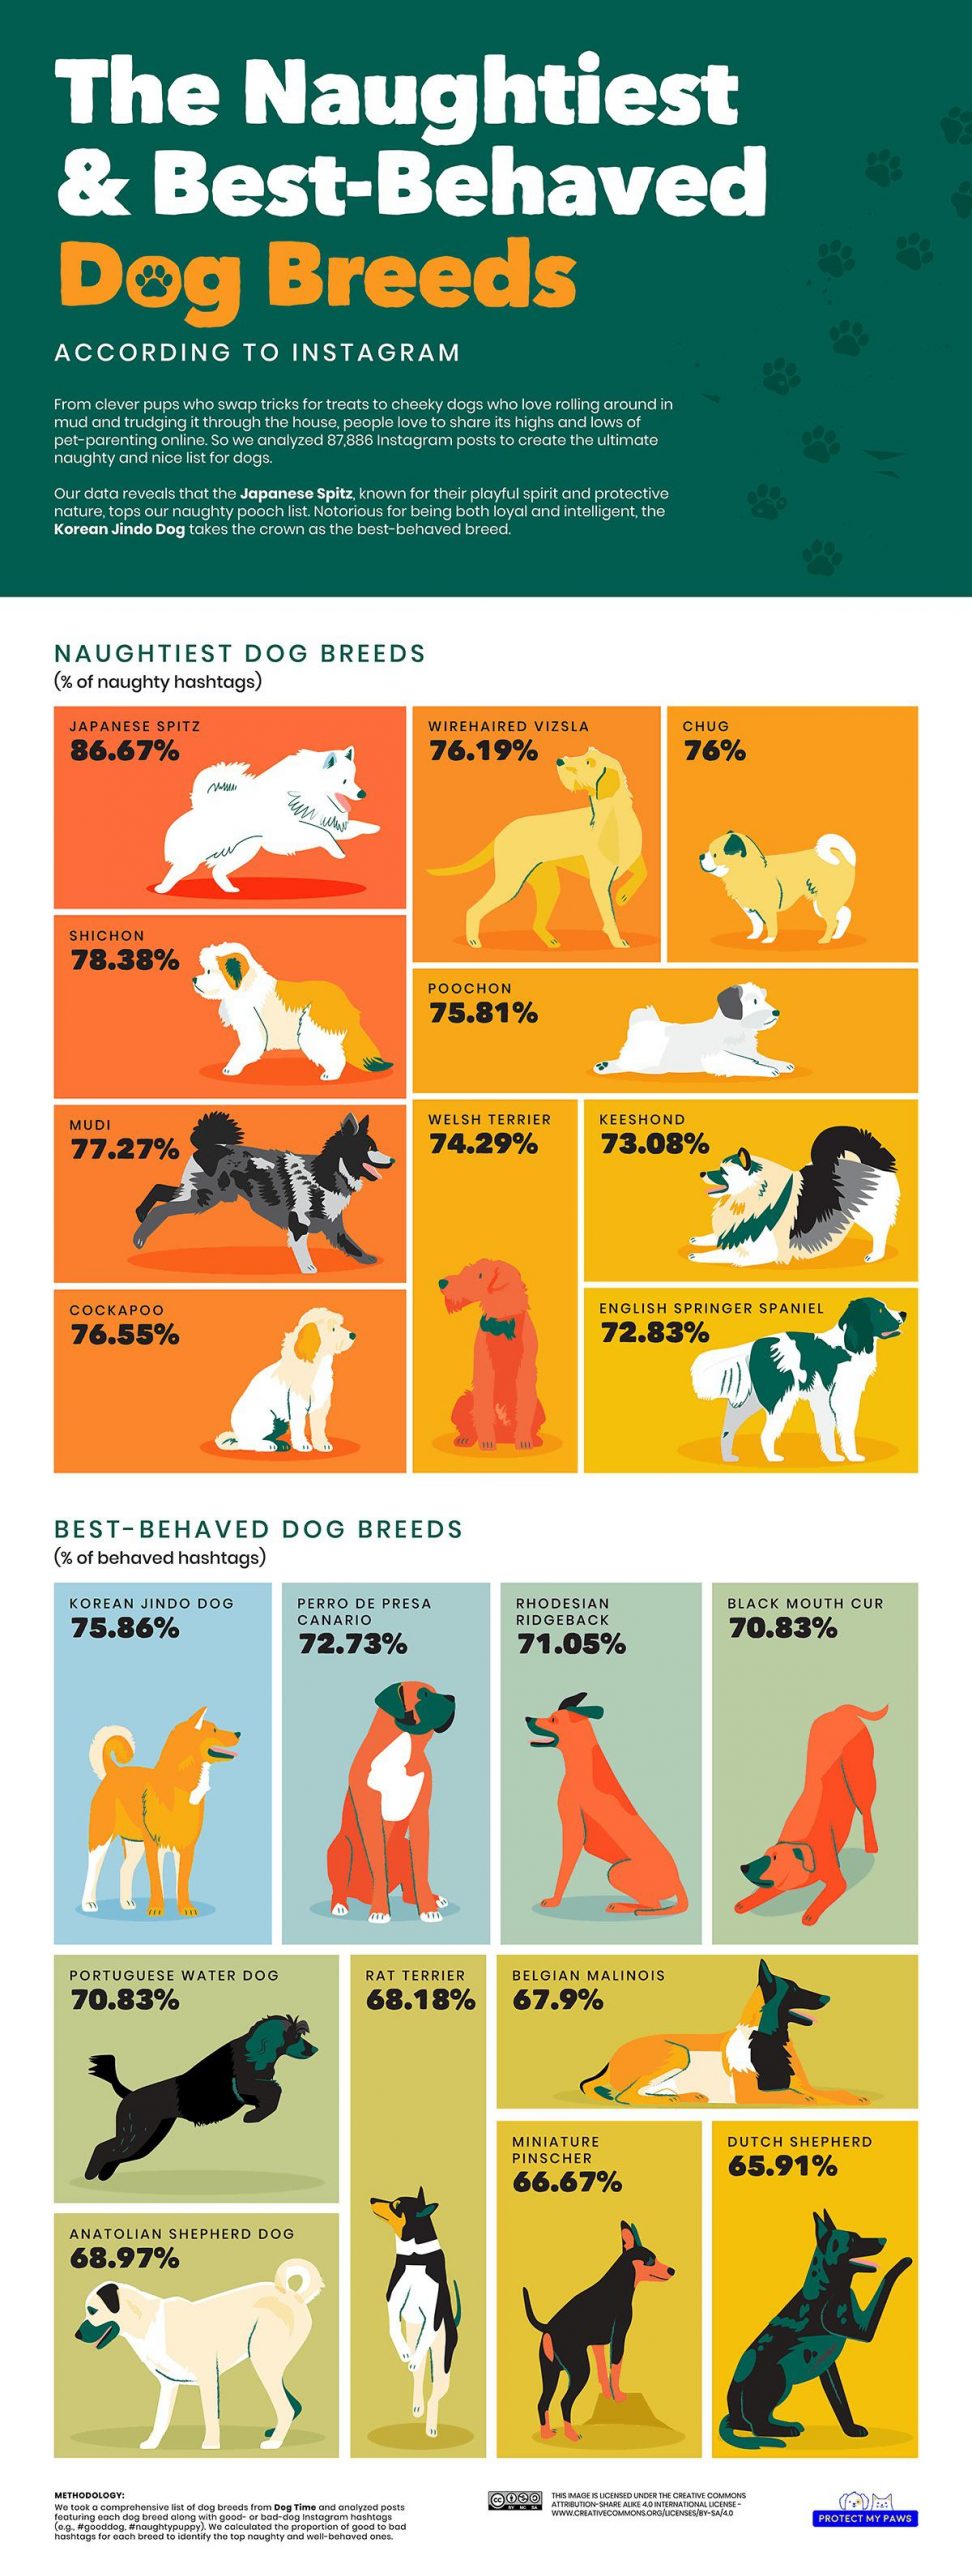 The Worst Dog Breeds According to Instagram #Naughty | Daily Infographic